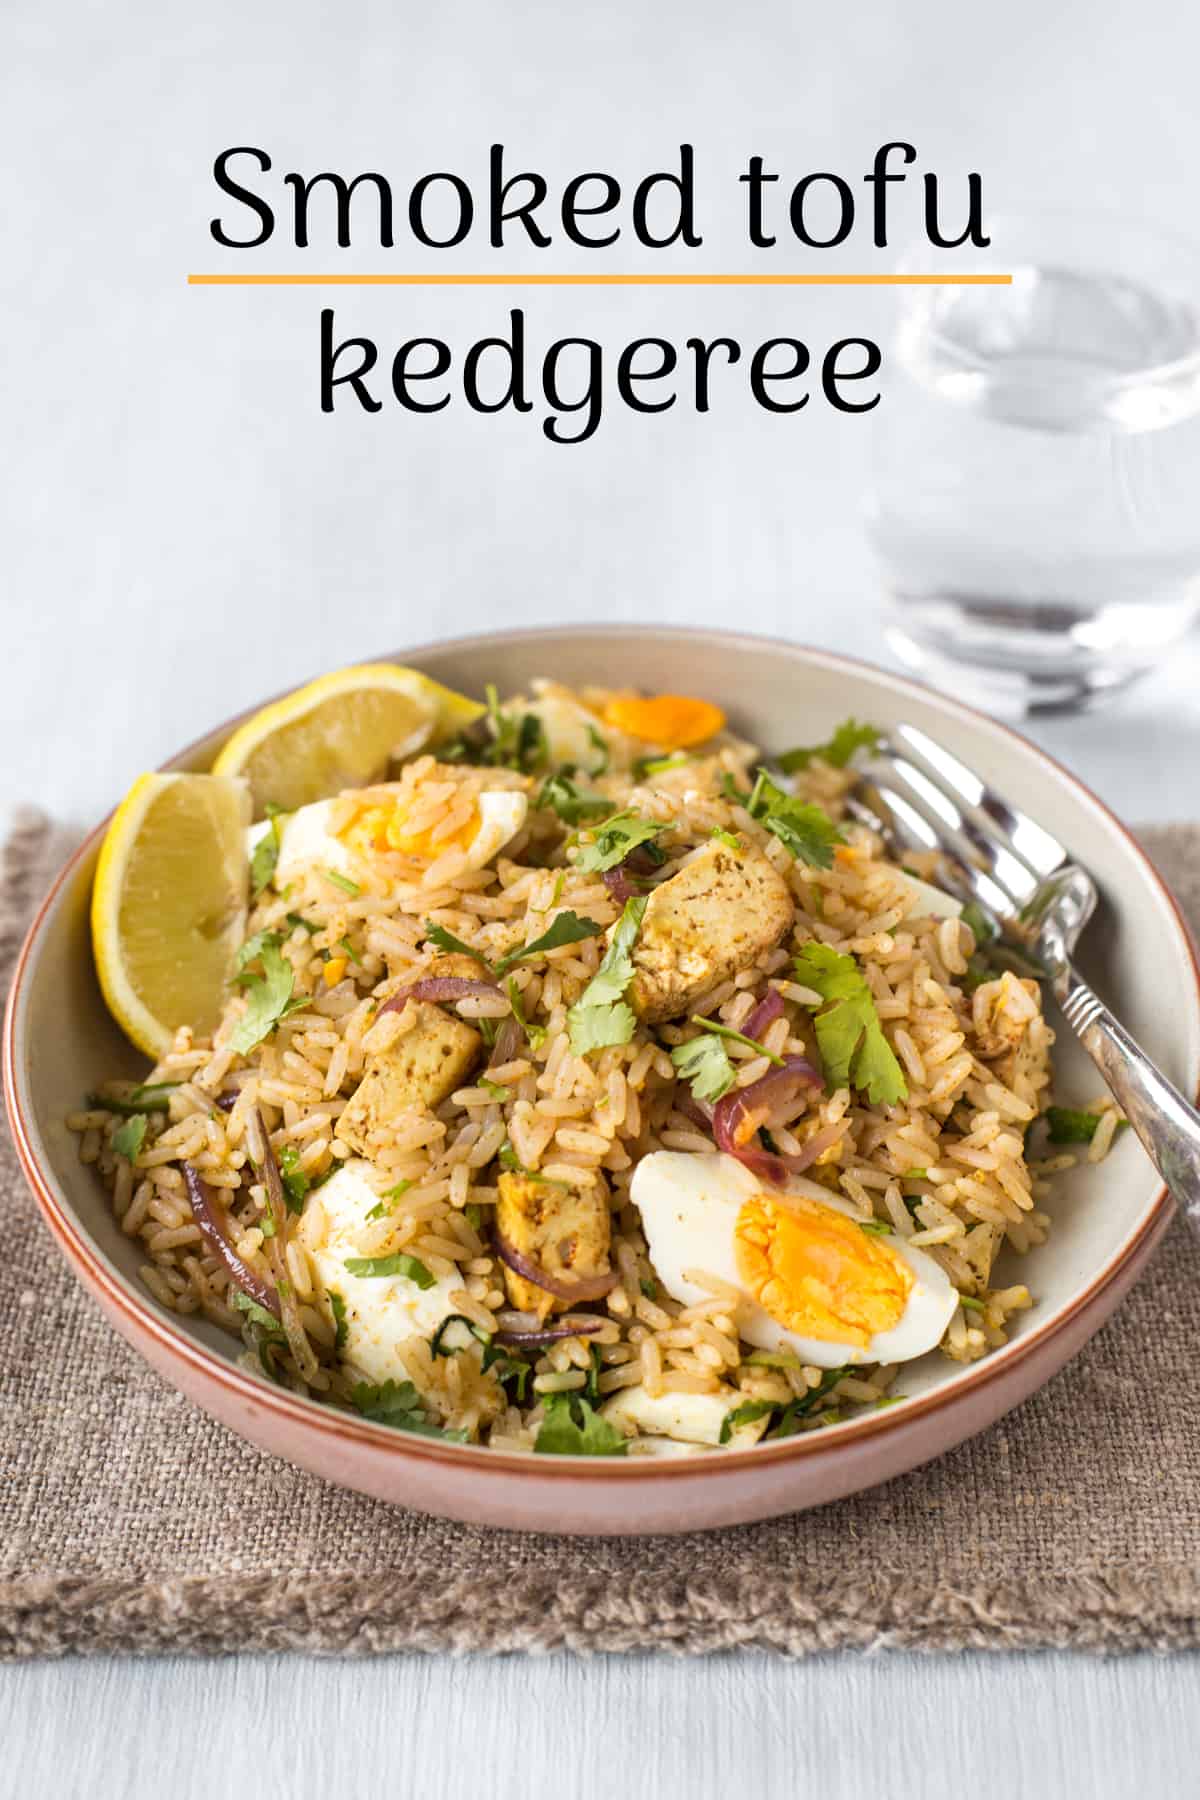 Portion of tofu kedgeree in a bowl with lemon and parsley.